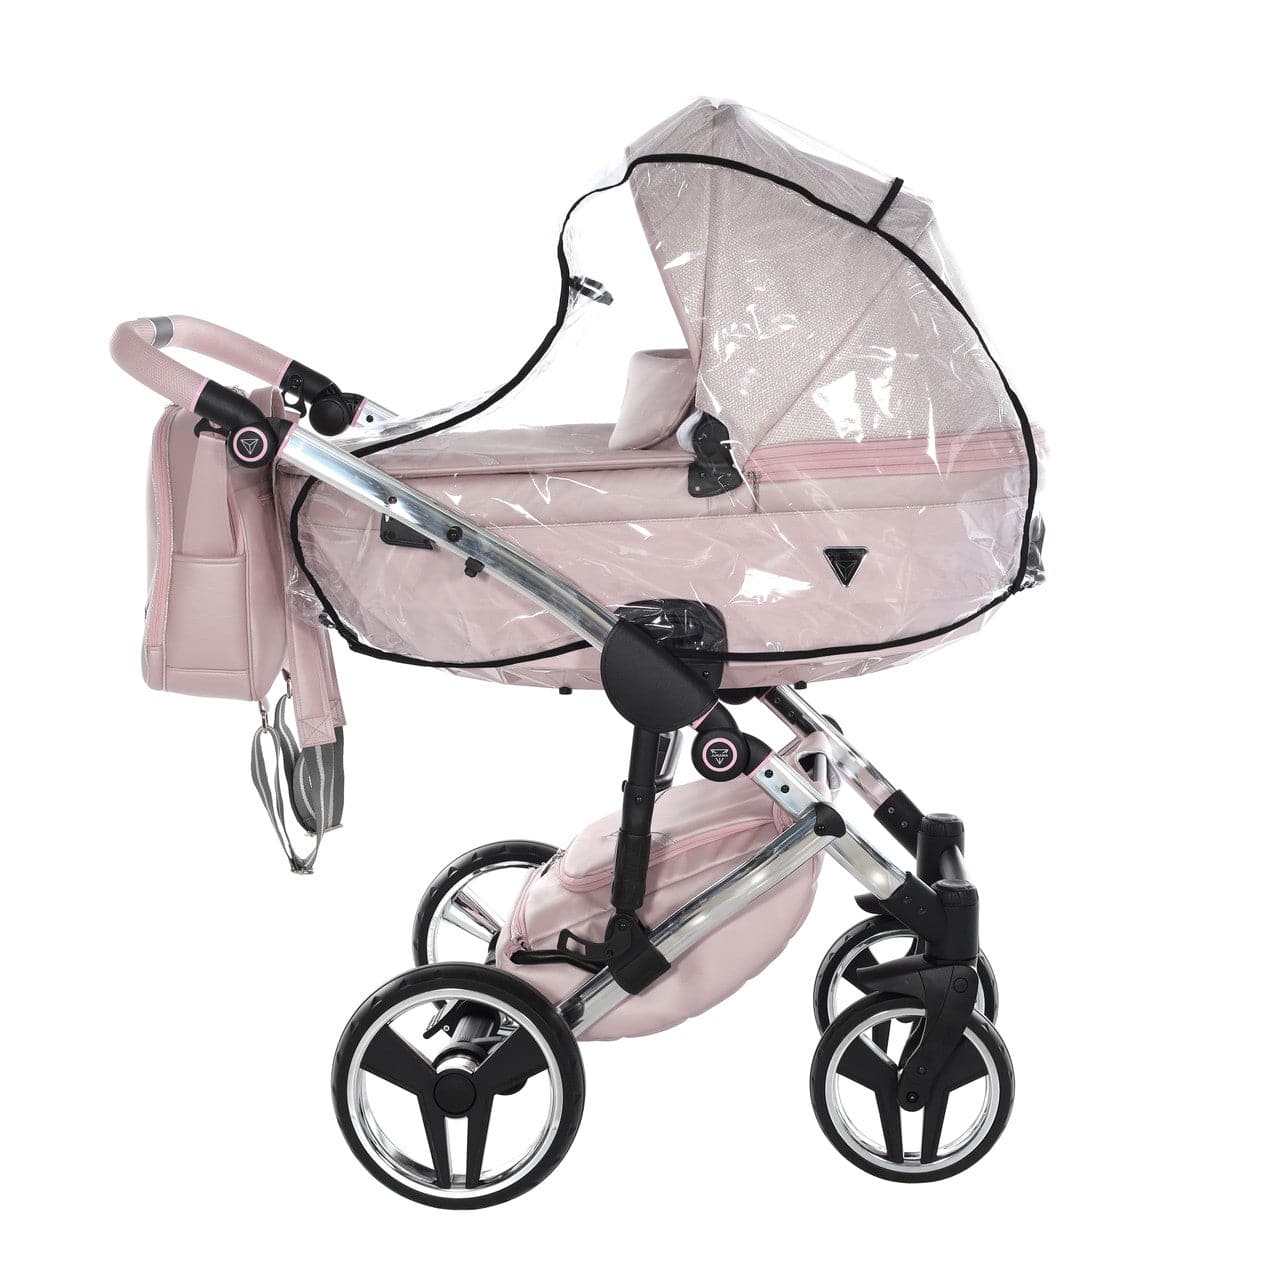 Junama Dolce 2 In 1 Pram - Pink - For Your Little One